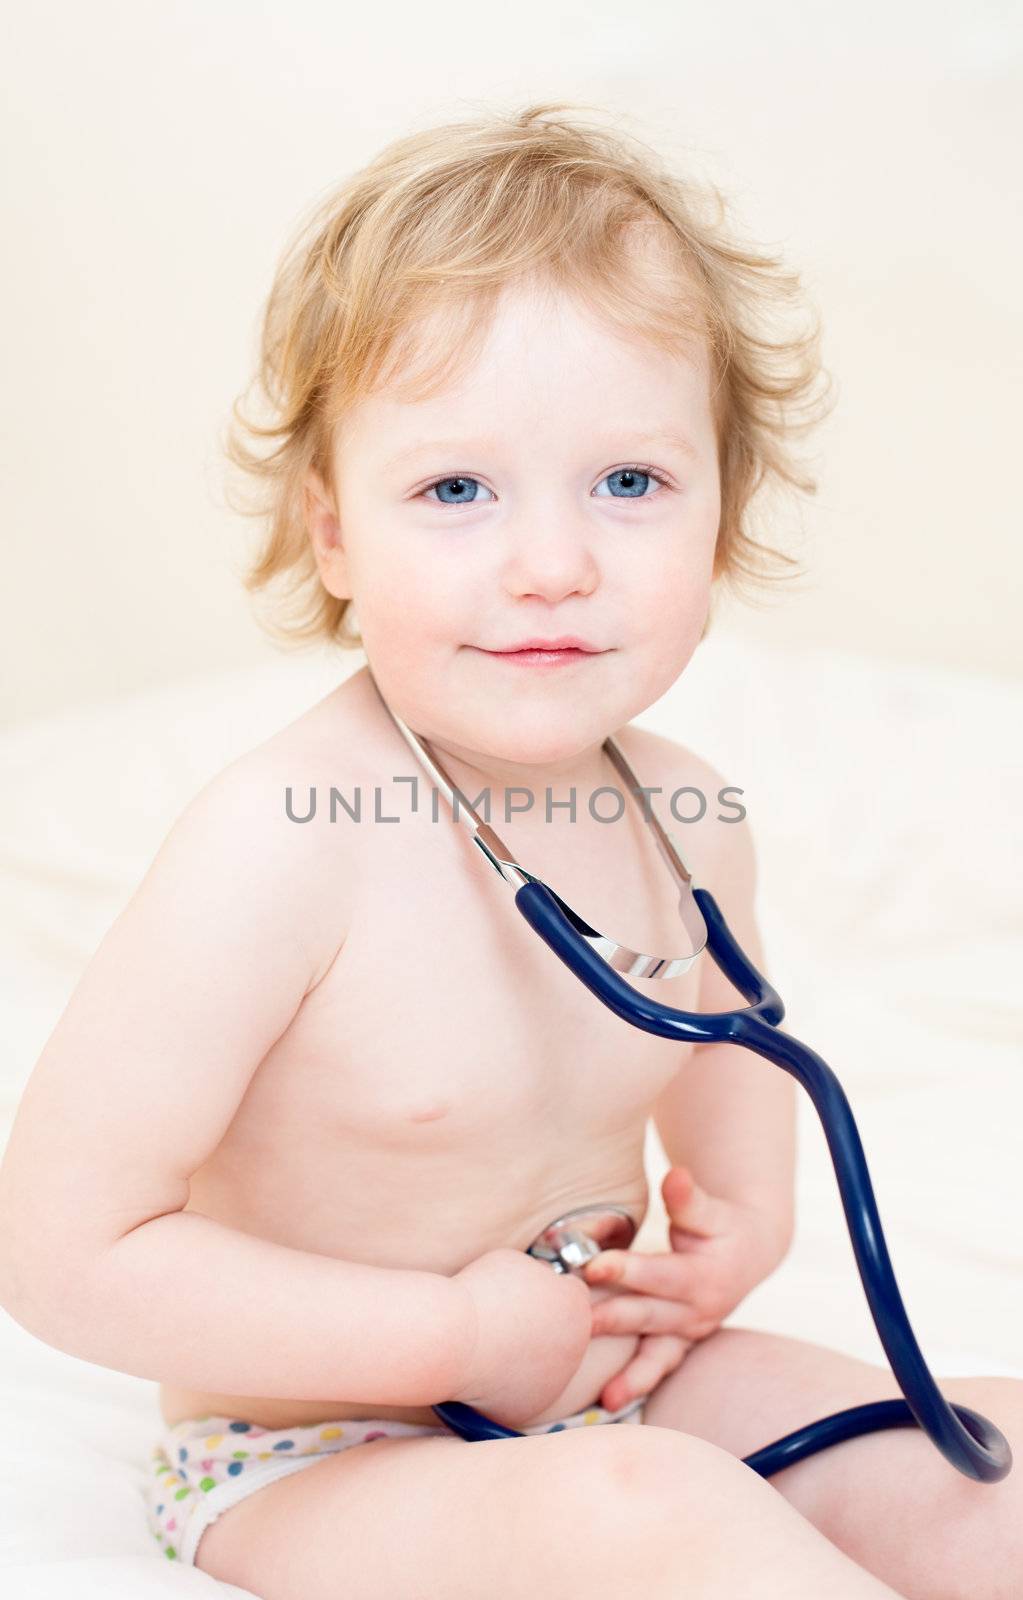 Child with stethoscope by naumoid